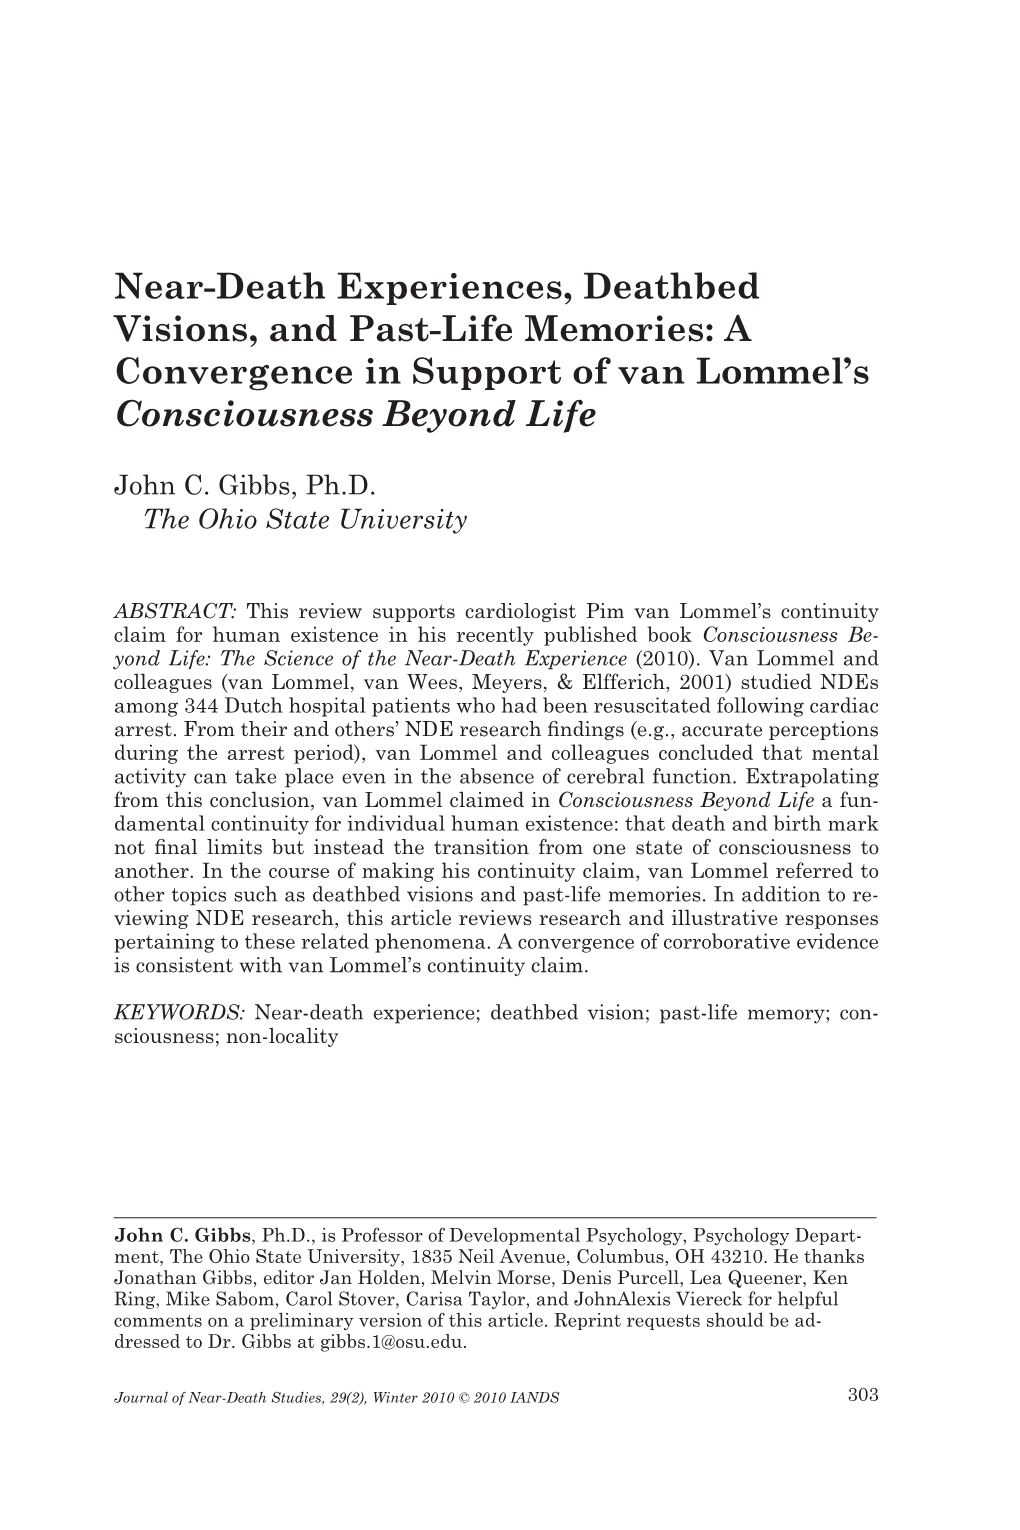 Near-Death Experiences, Deathbed Visions, and Past-Life Memories: a Convergence in Support of Van Lommel’S Consciousness Beyond Life